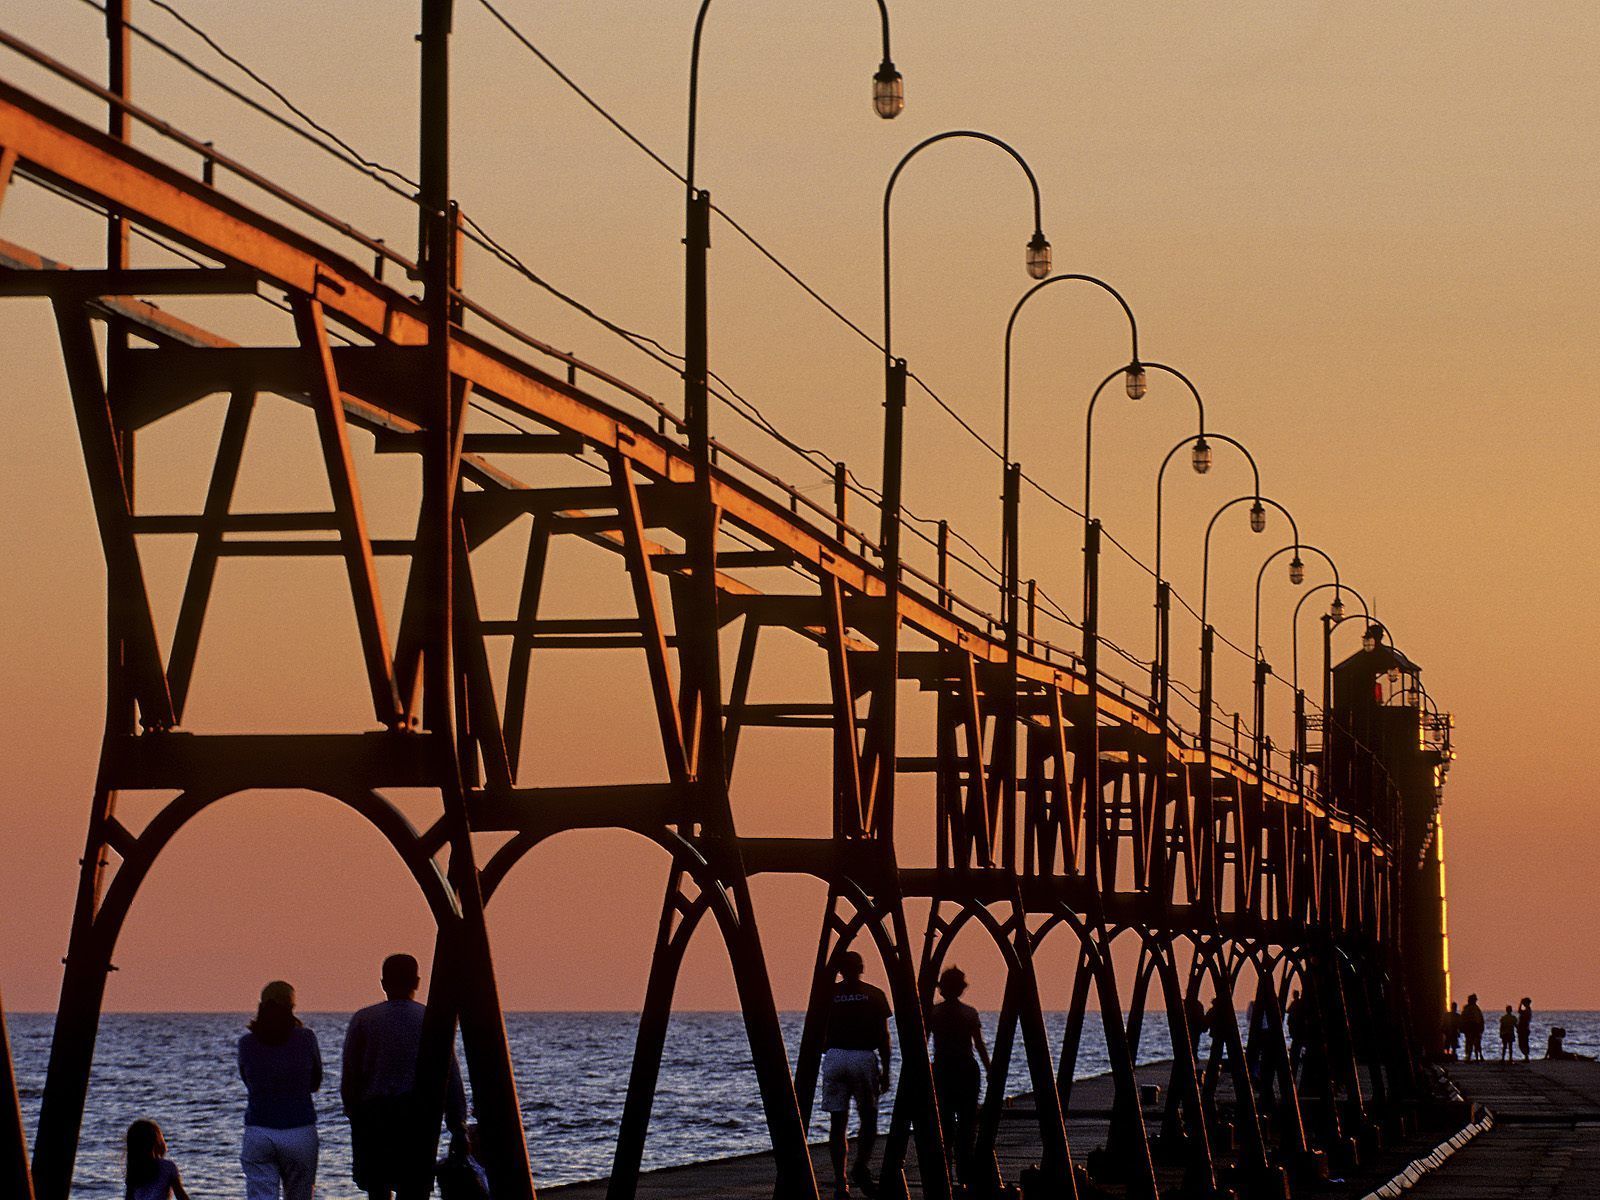 south_haven_pierhead_light_and_catwalk_at_sunset_lake_michigan_south_haven_michigan-1299874017